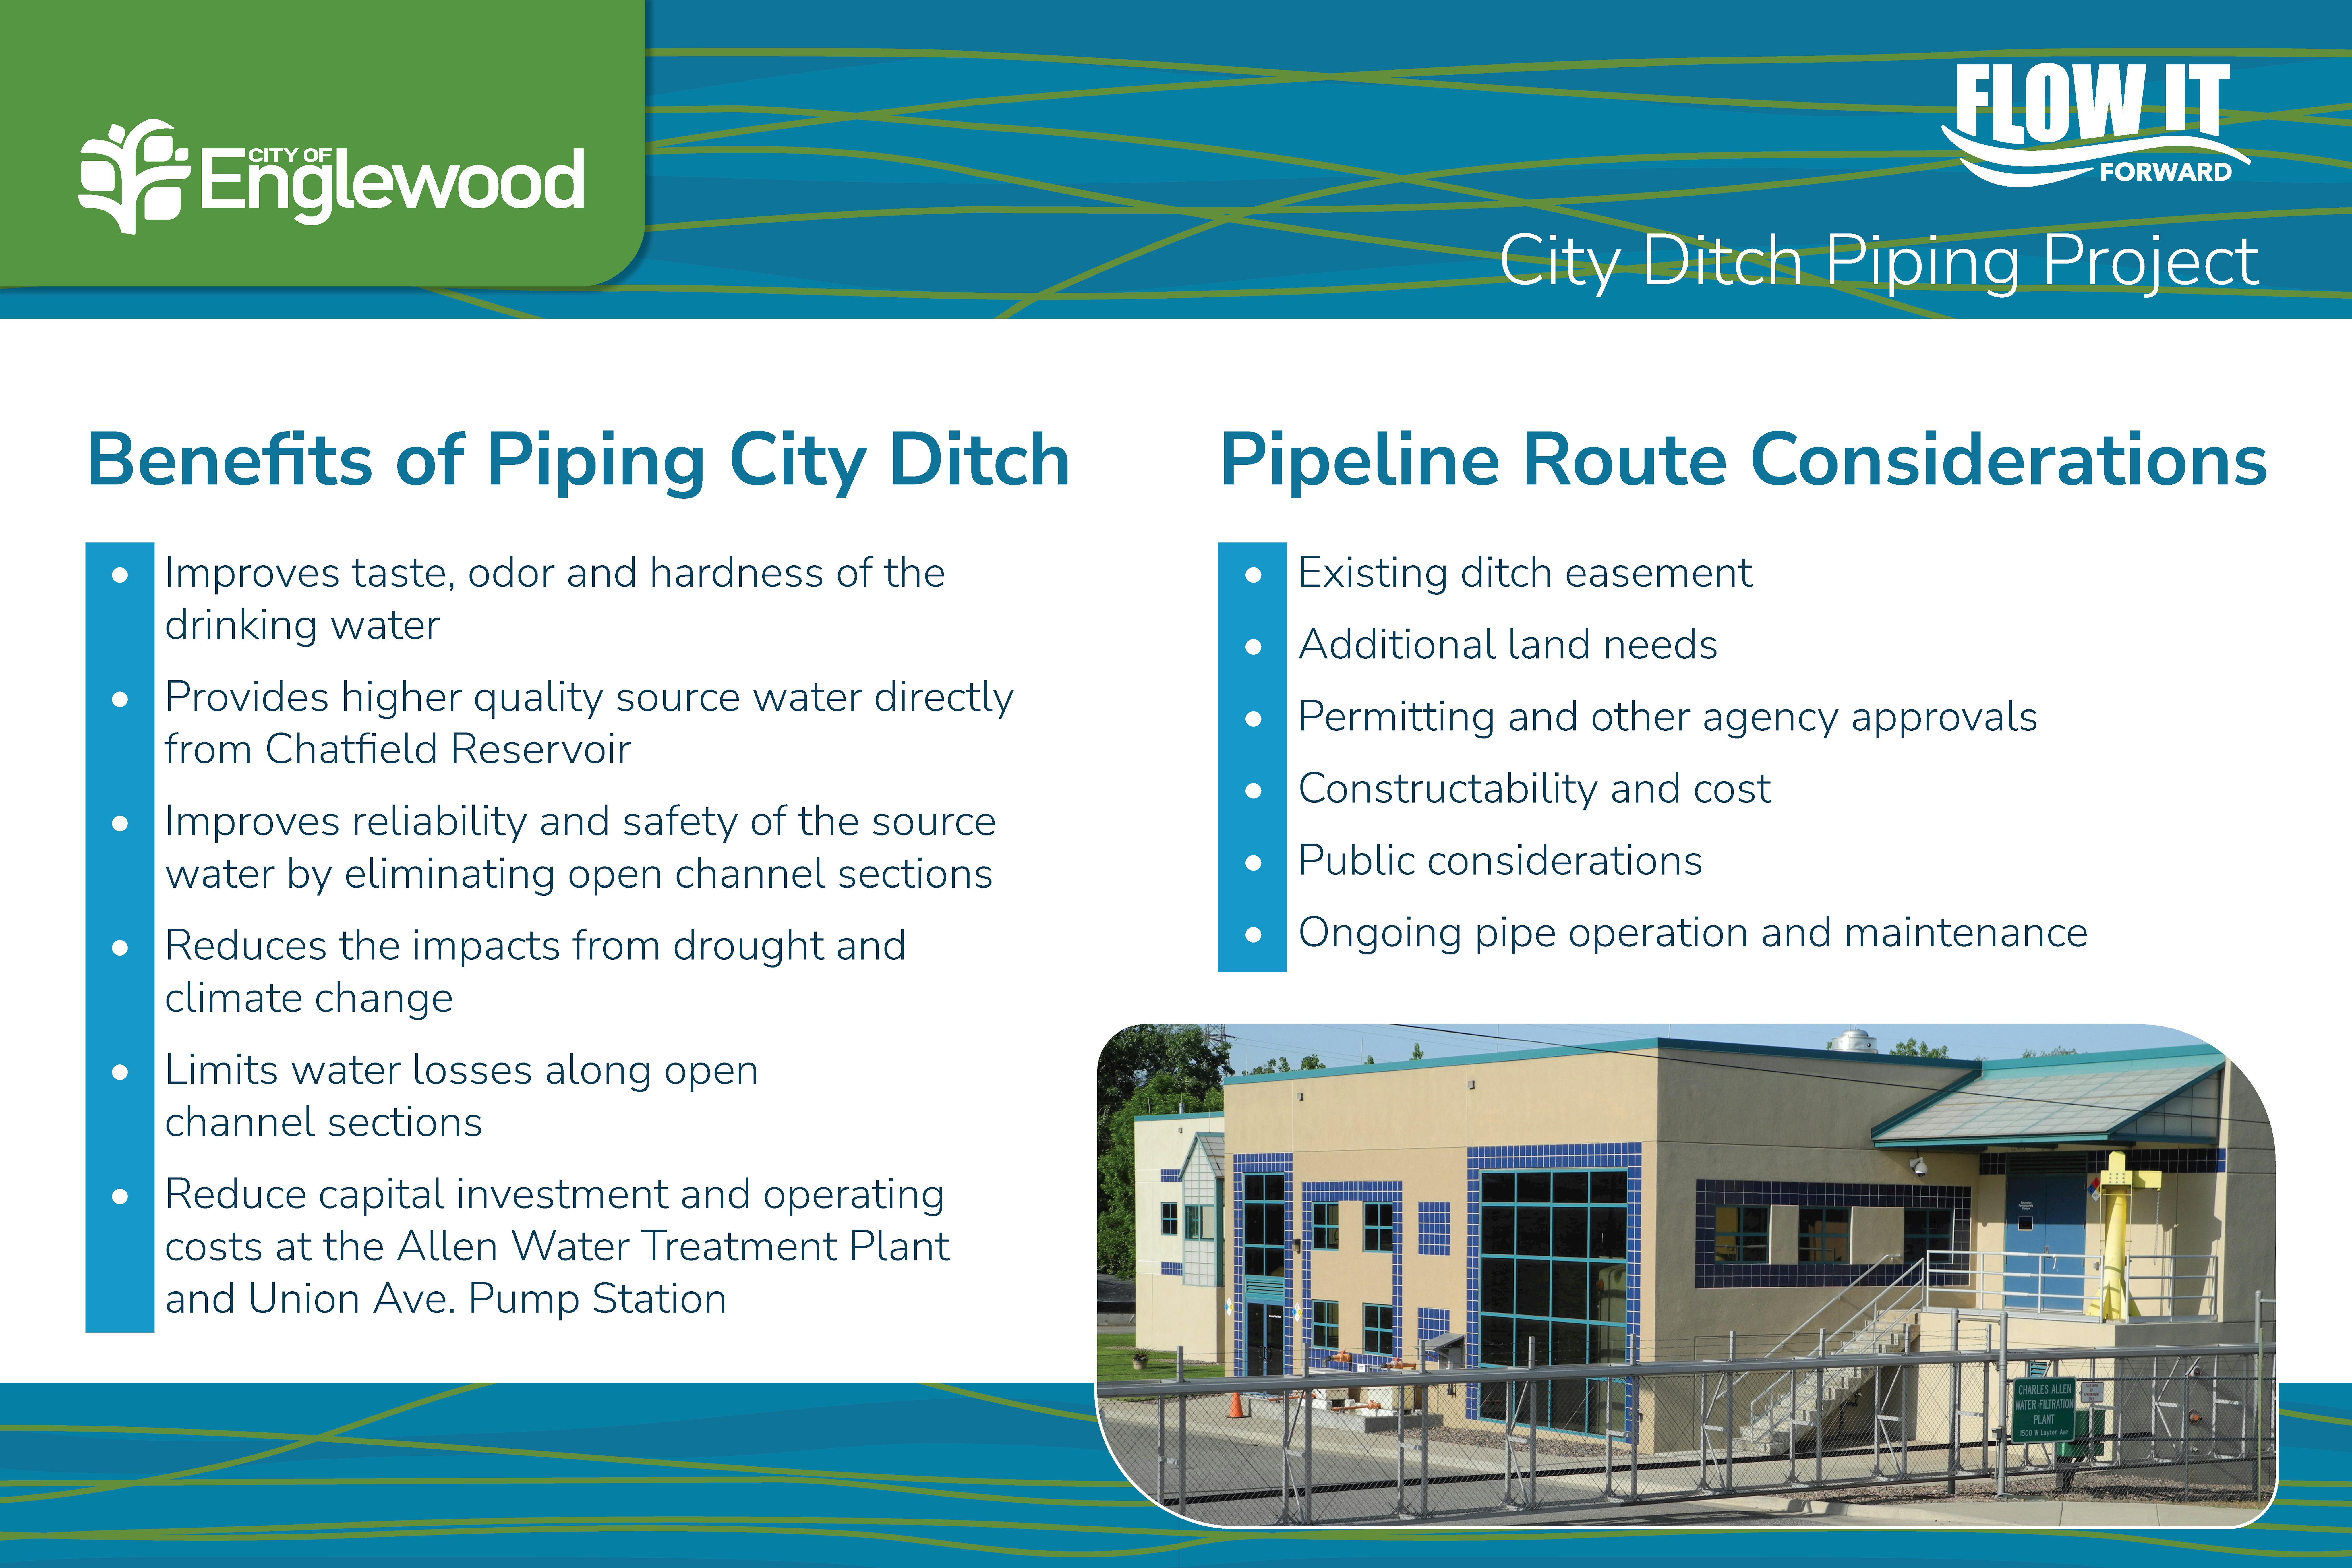 Benefits of the City Ditch Piping Project